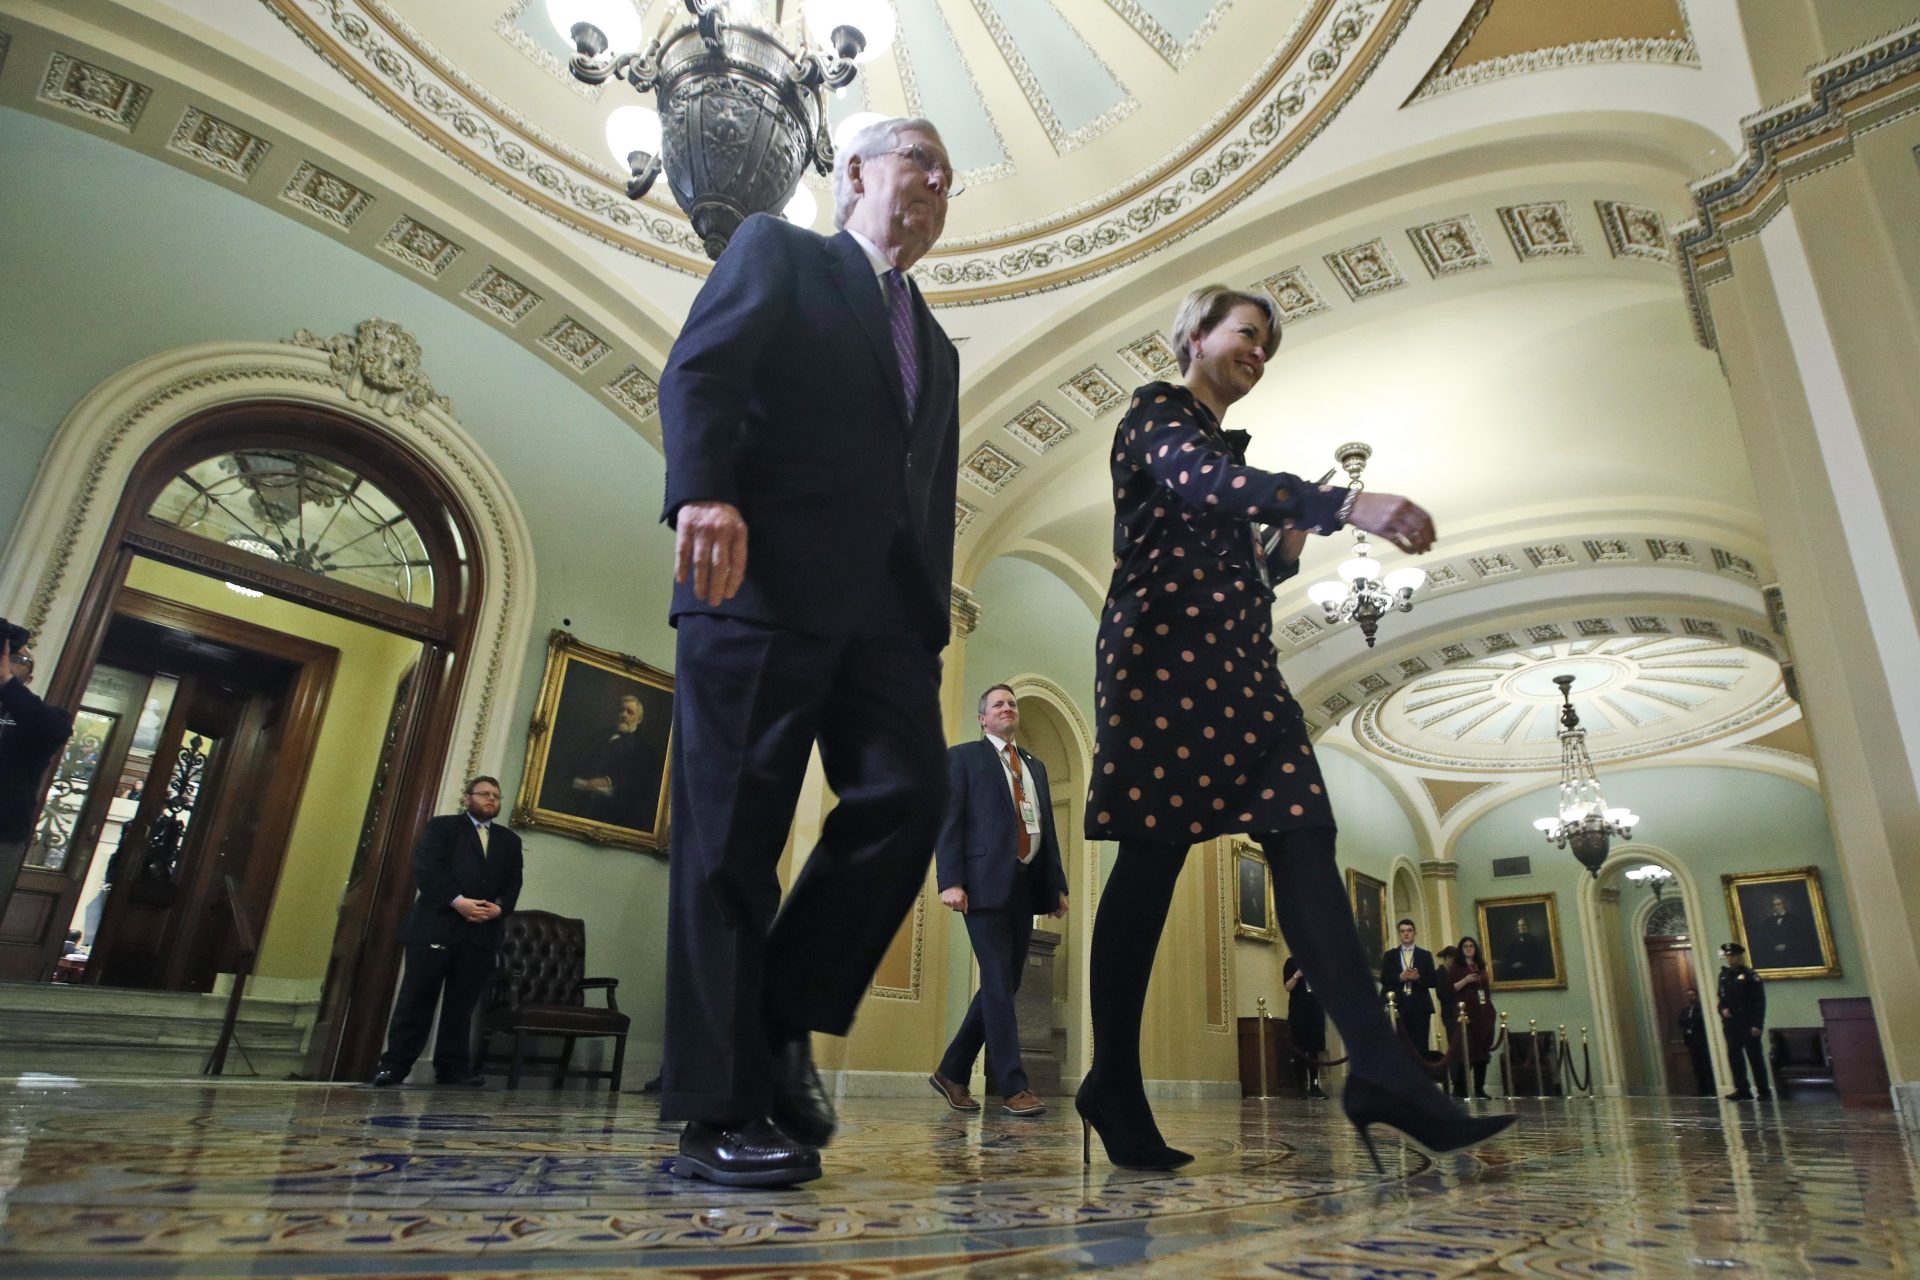 Senate Majority Leader Mitch McConnell, R-Ky., walks from the Senate chamber after the days proceedings in the impeachment trial of President Donald Trump at the U.S. Capitol Wednesday Jan 29, 2020, in Washington.